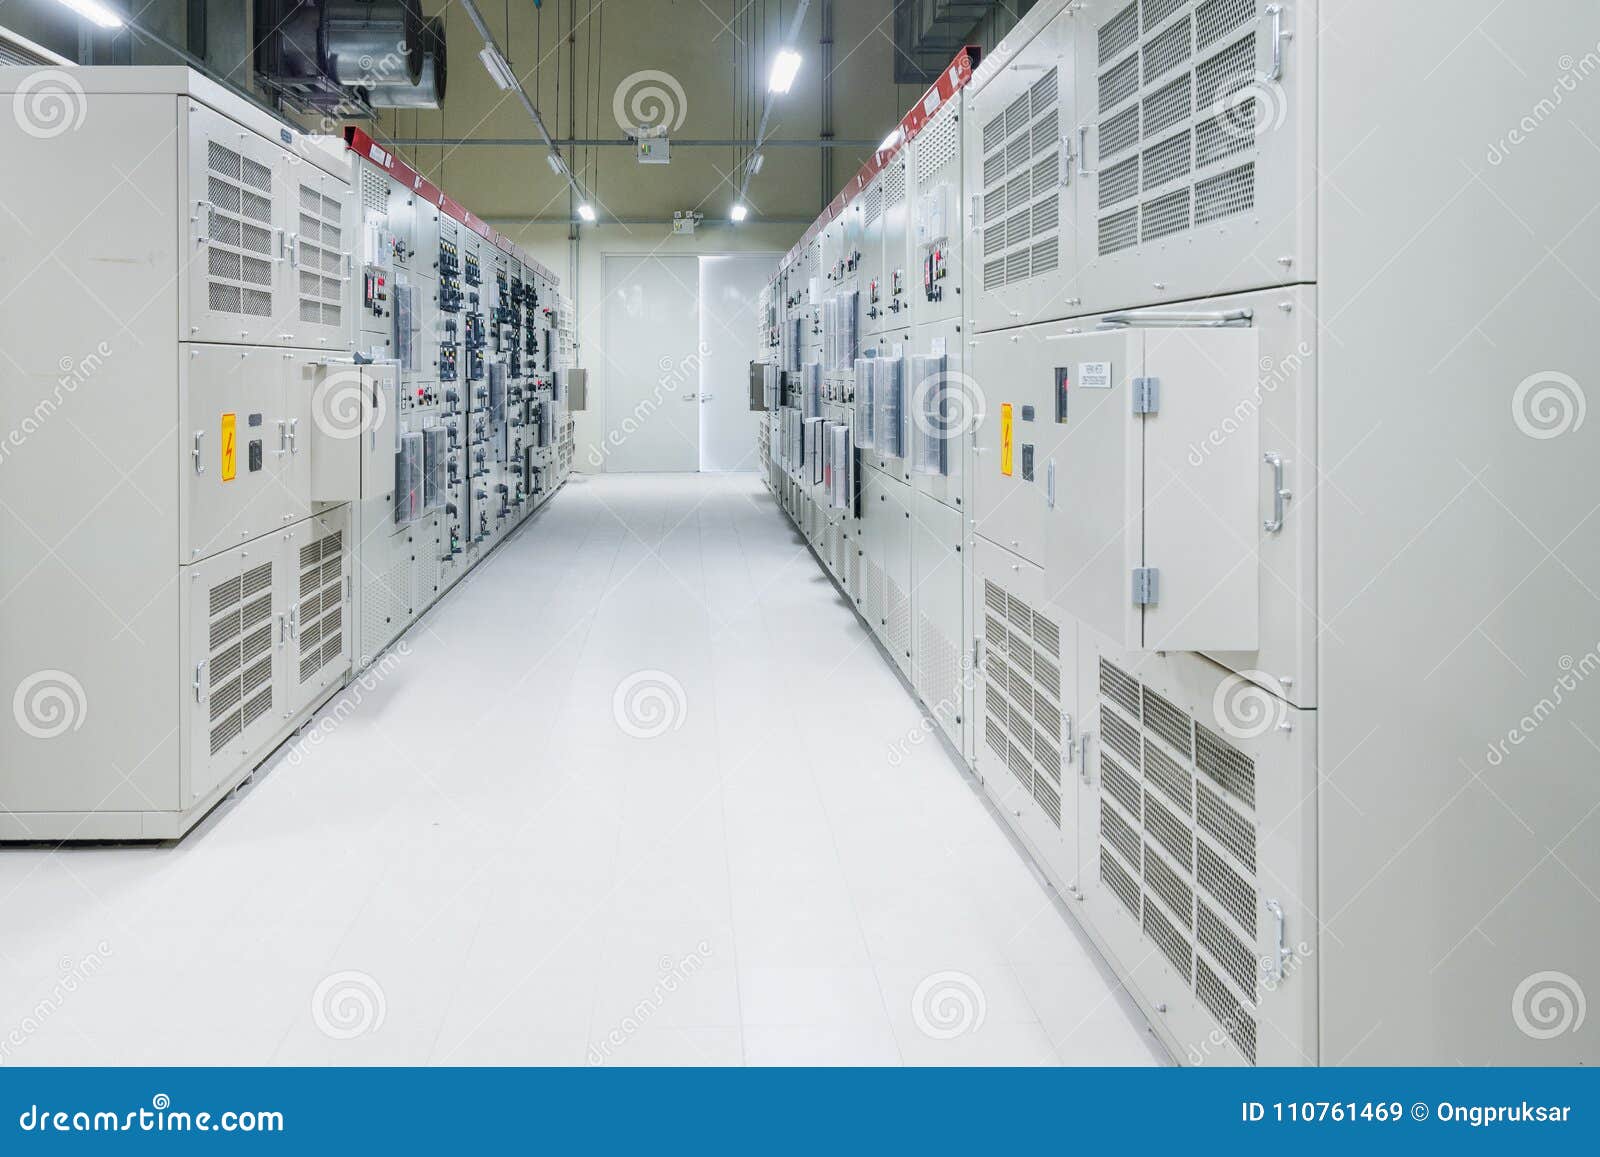 electrical room, medium and high voltage switcher, equipment,